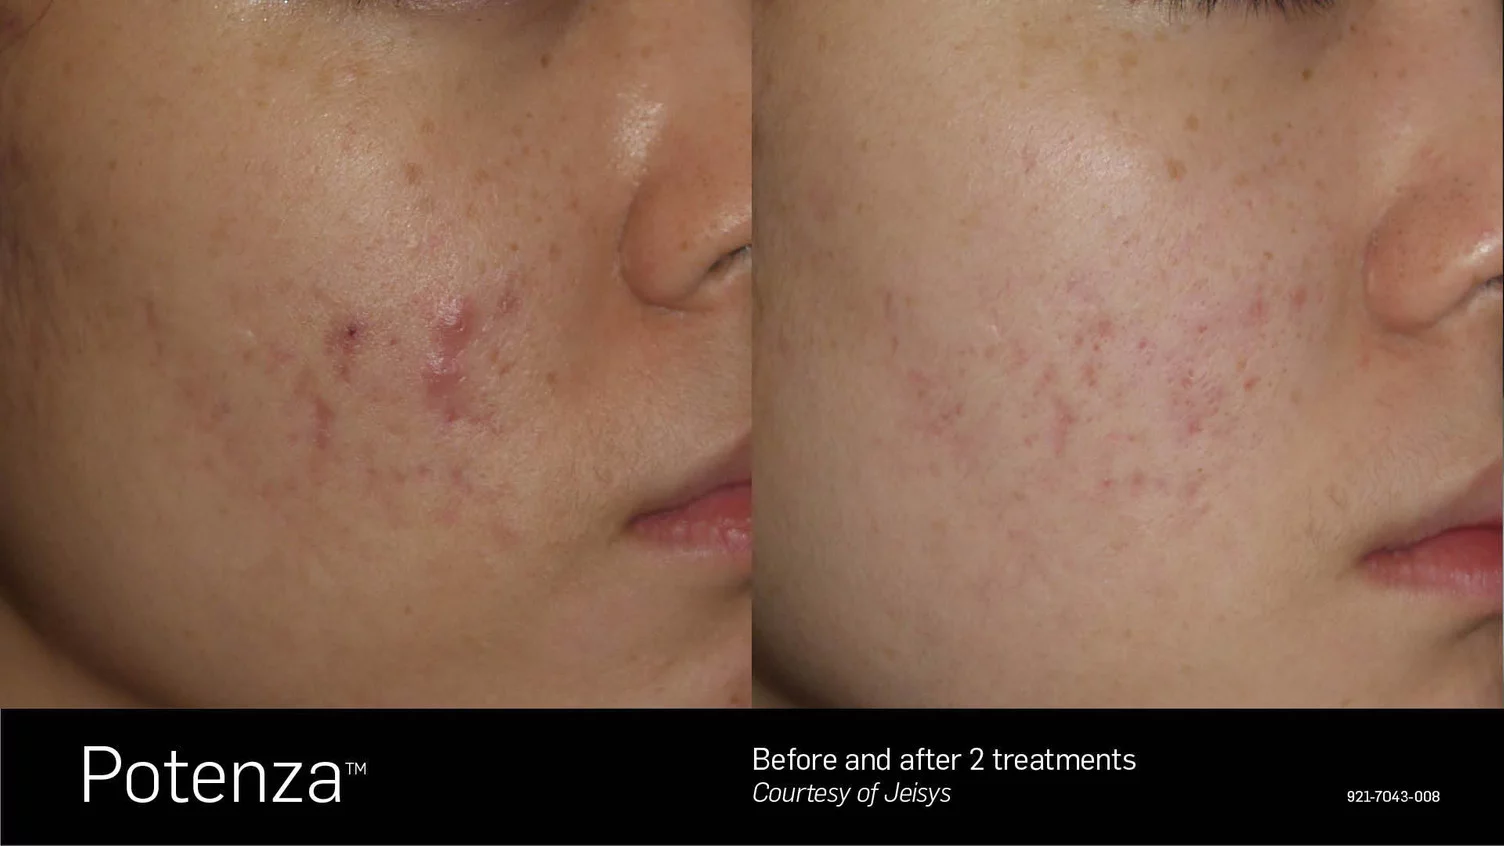 Potenza Acne Treatment Toronto Before and After (1)